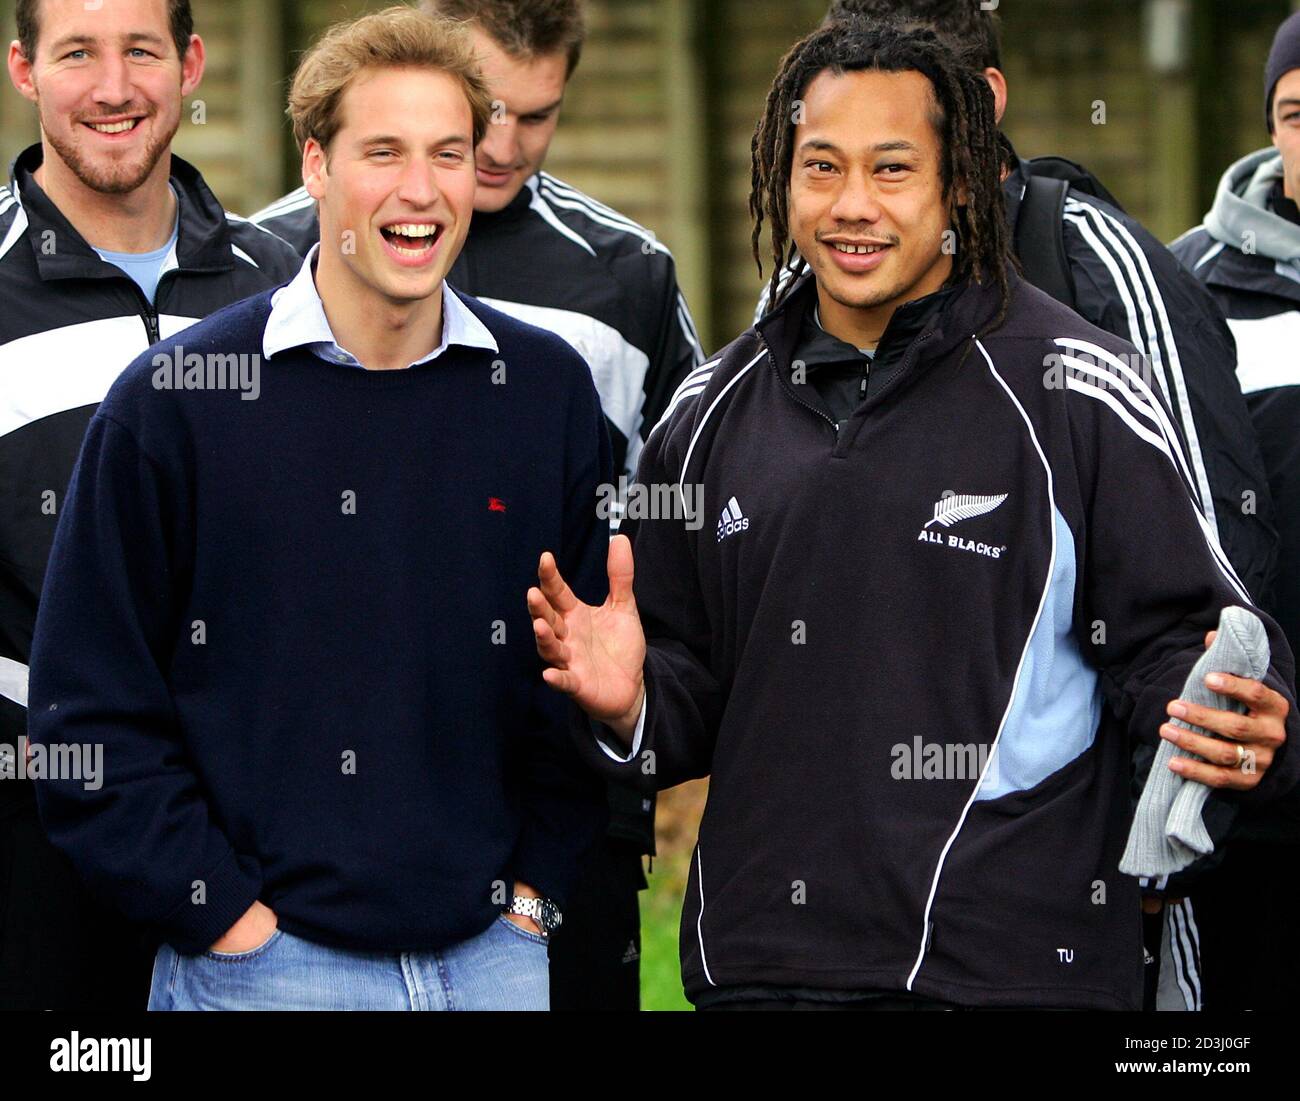 Britain's Prince William laughs with captain of the All Blacks Tana Umaga at a public training session in Auckland.  Britain's Prince William (front L) laughs with the captain of the All Blacks Tana Umaga (front R) at a public training session in Auckland July 4, 2005. Prince William, who graduated recently from Scotland's St Andrews University, met the All Black team two days after they defeated the British and Irish Lions in Wellington and took an unbeatable 2-0 lead in the best-of-three test series. Prince William is also performing official duties during his ten-day tour of New Zealand, hi Stock Photo